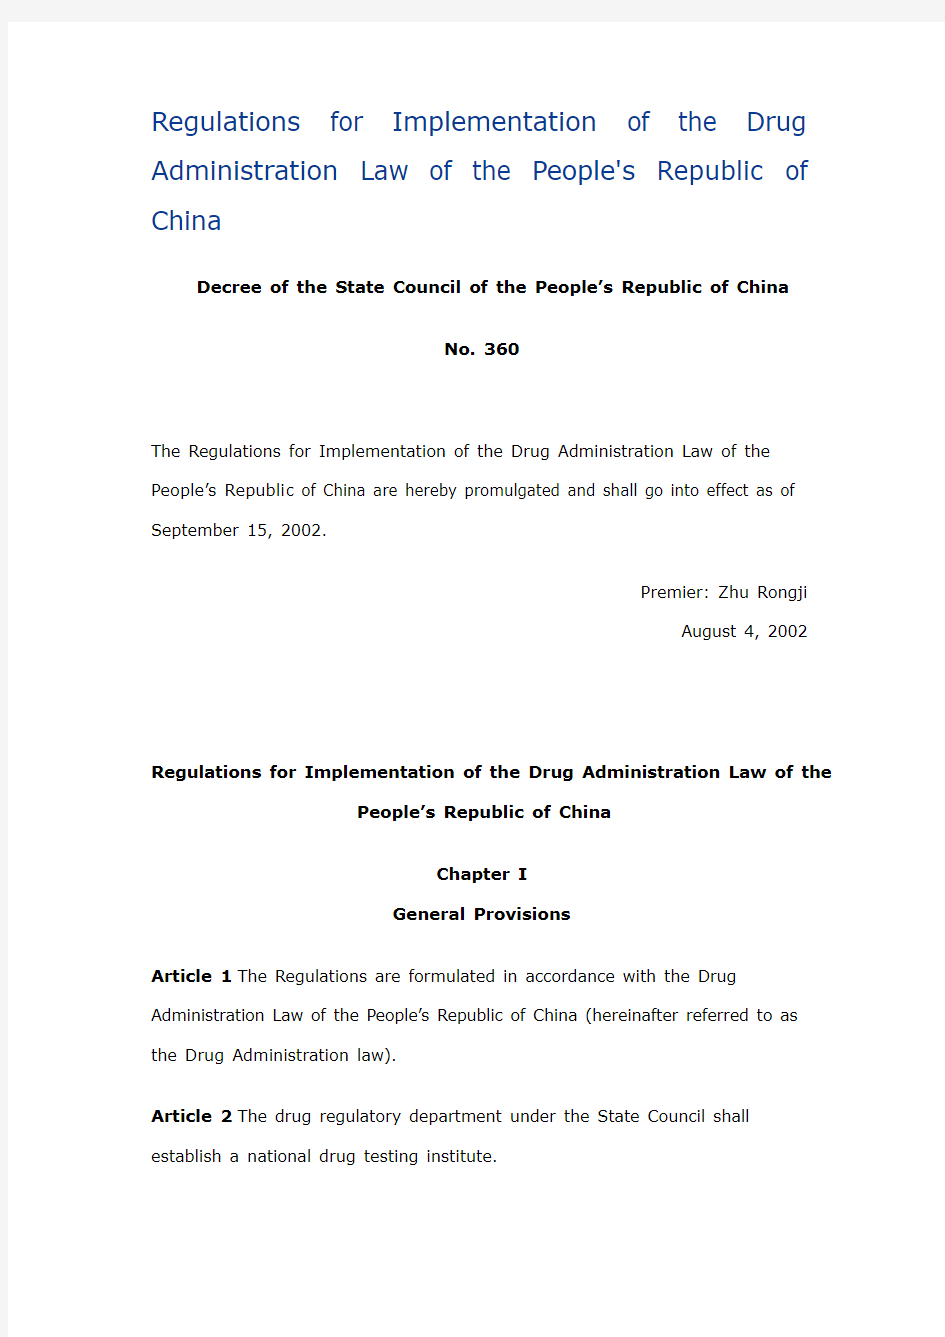 Regulations for Implementation of the Drug Administration Law of the People's Republic of China